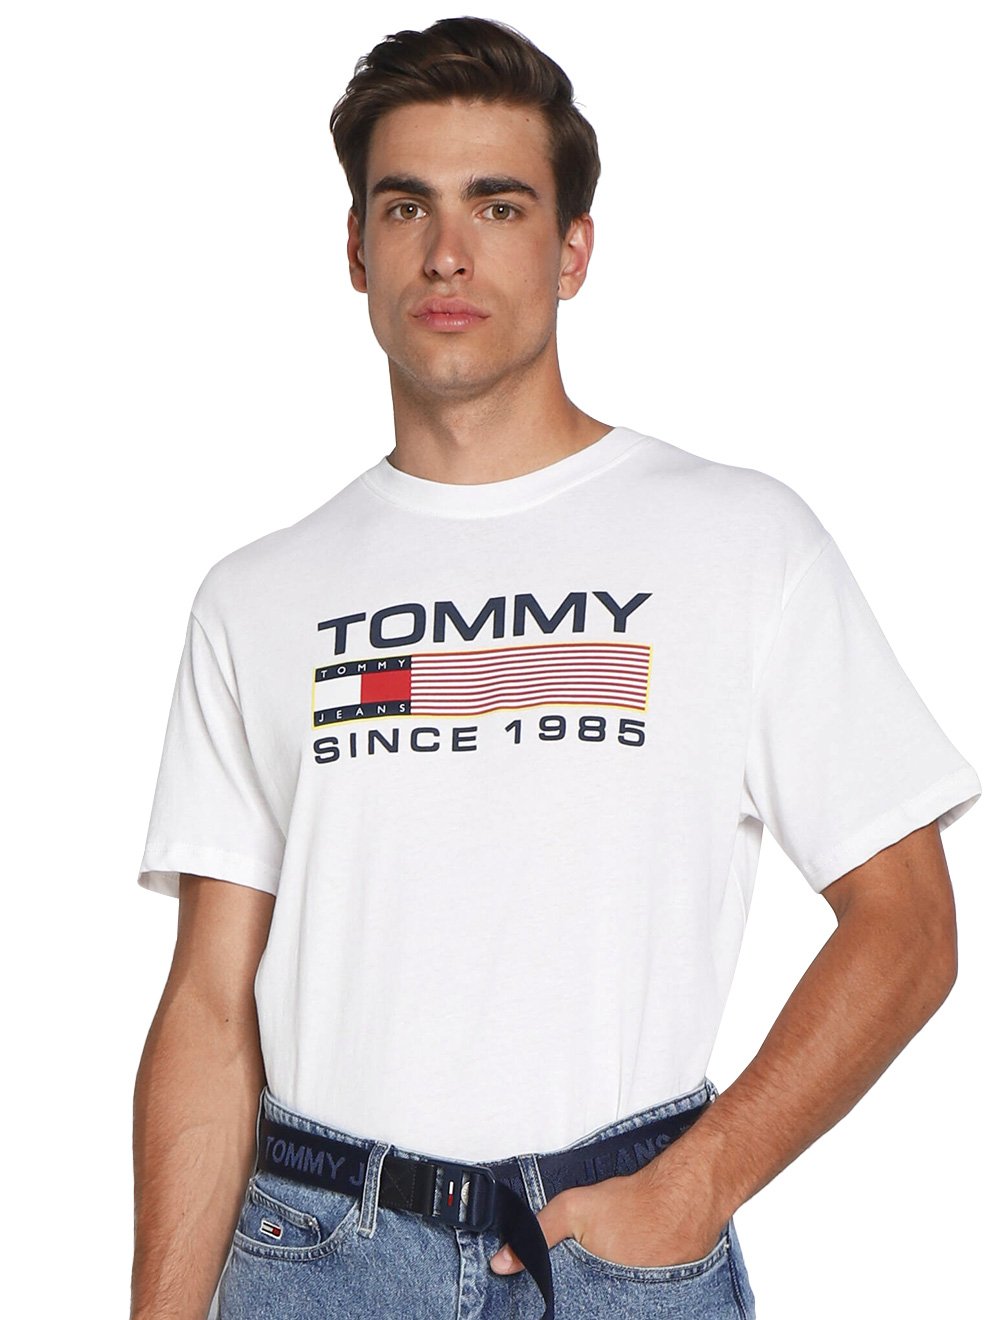 Camiseta Tommy Jeans Masculina Classic Twisted Logo Branca